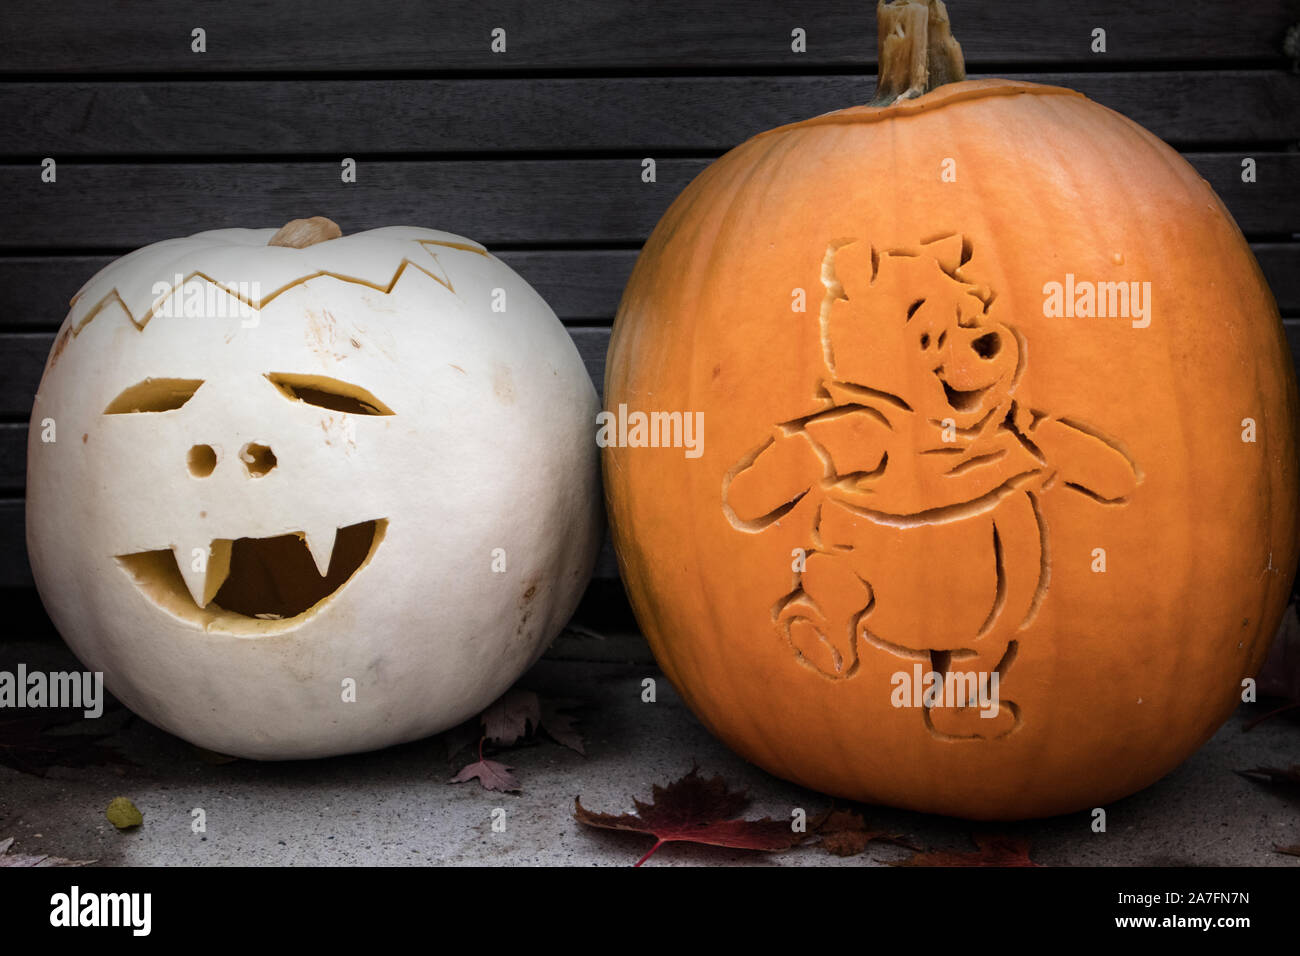 Two Halloween pumpkins, one represents Winnie-the-Pooh. Stock Photo